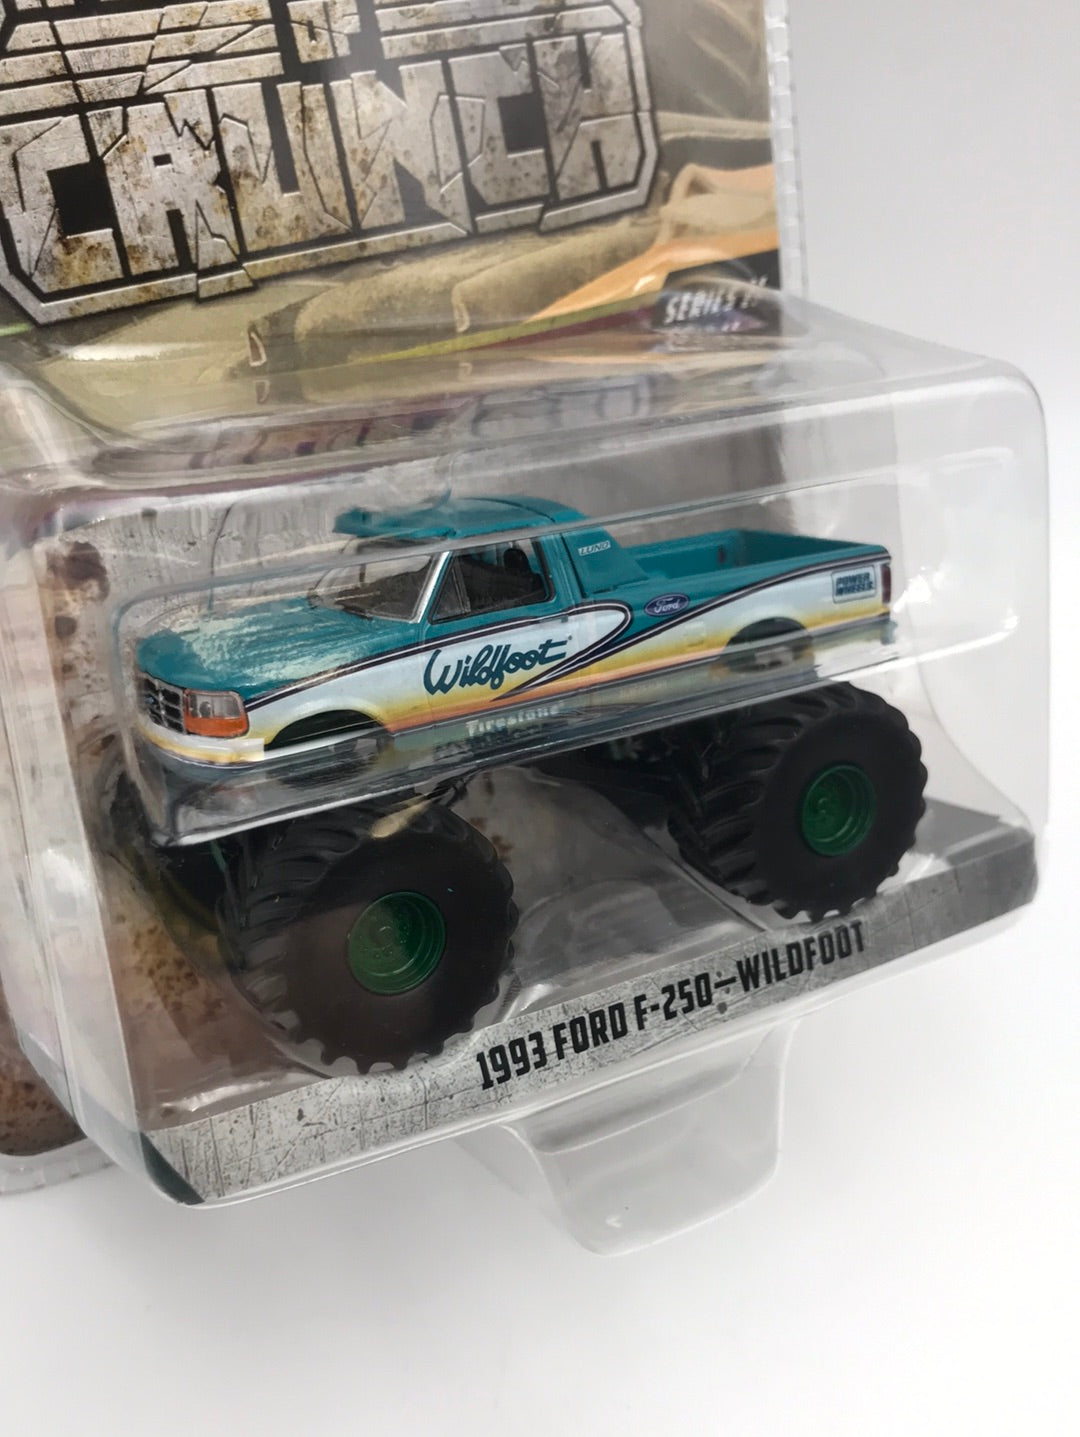 Greenlight Kings of crunch series 11 1993 Ford F-250 Wildfoot greenie chase green machine VHTF